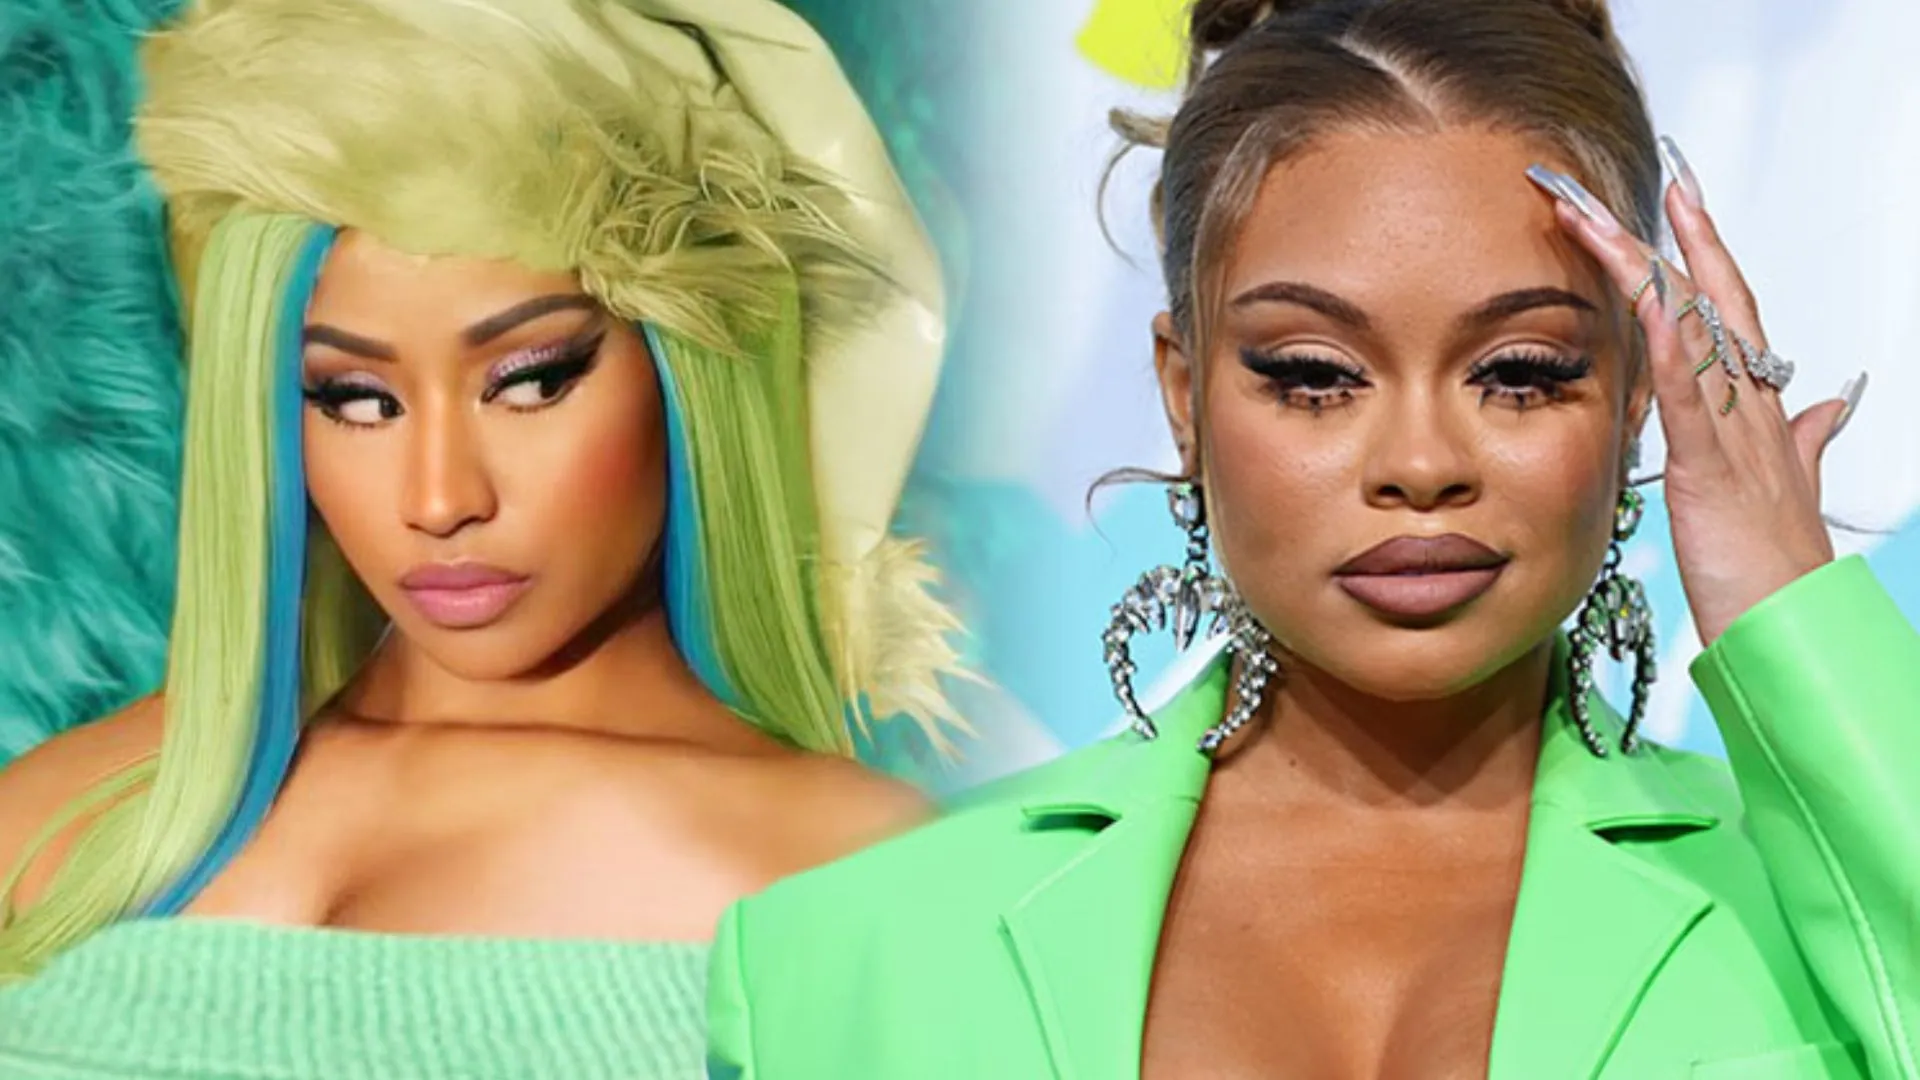 Nicki Minaj Unfollows Latto After She Tweeted About a Messy Artist Trying to Sabotage Her